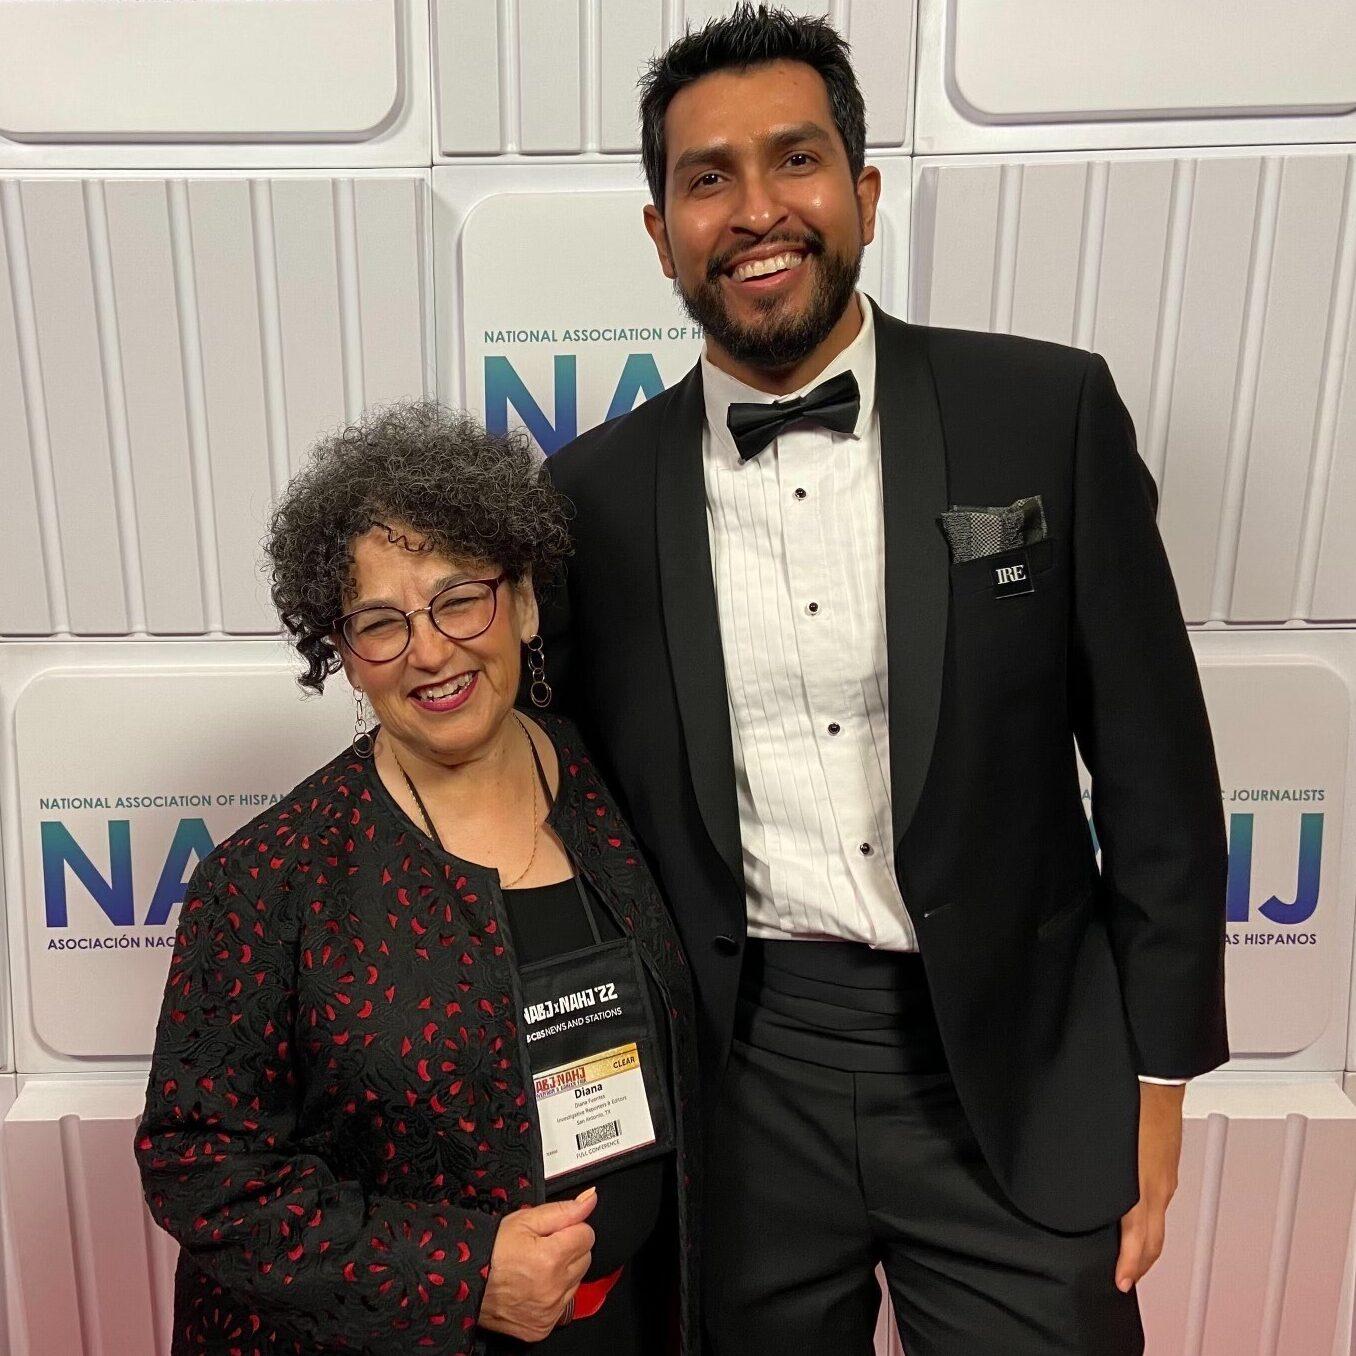 IRE Executive Director Diana Fuentes and IRE Director of Diversity & Inclusion Francisco Vara-Orta pose for a photo at NAHJ's 2022 conference.